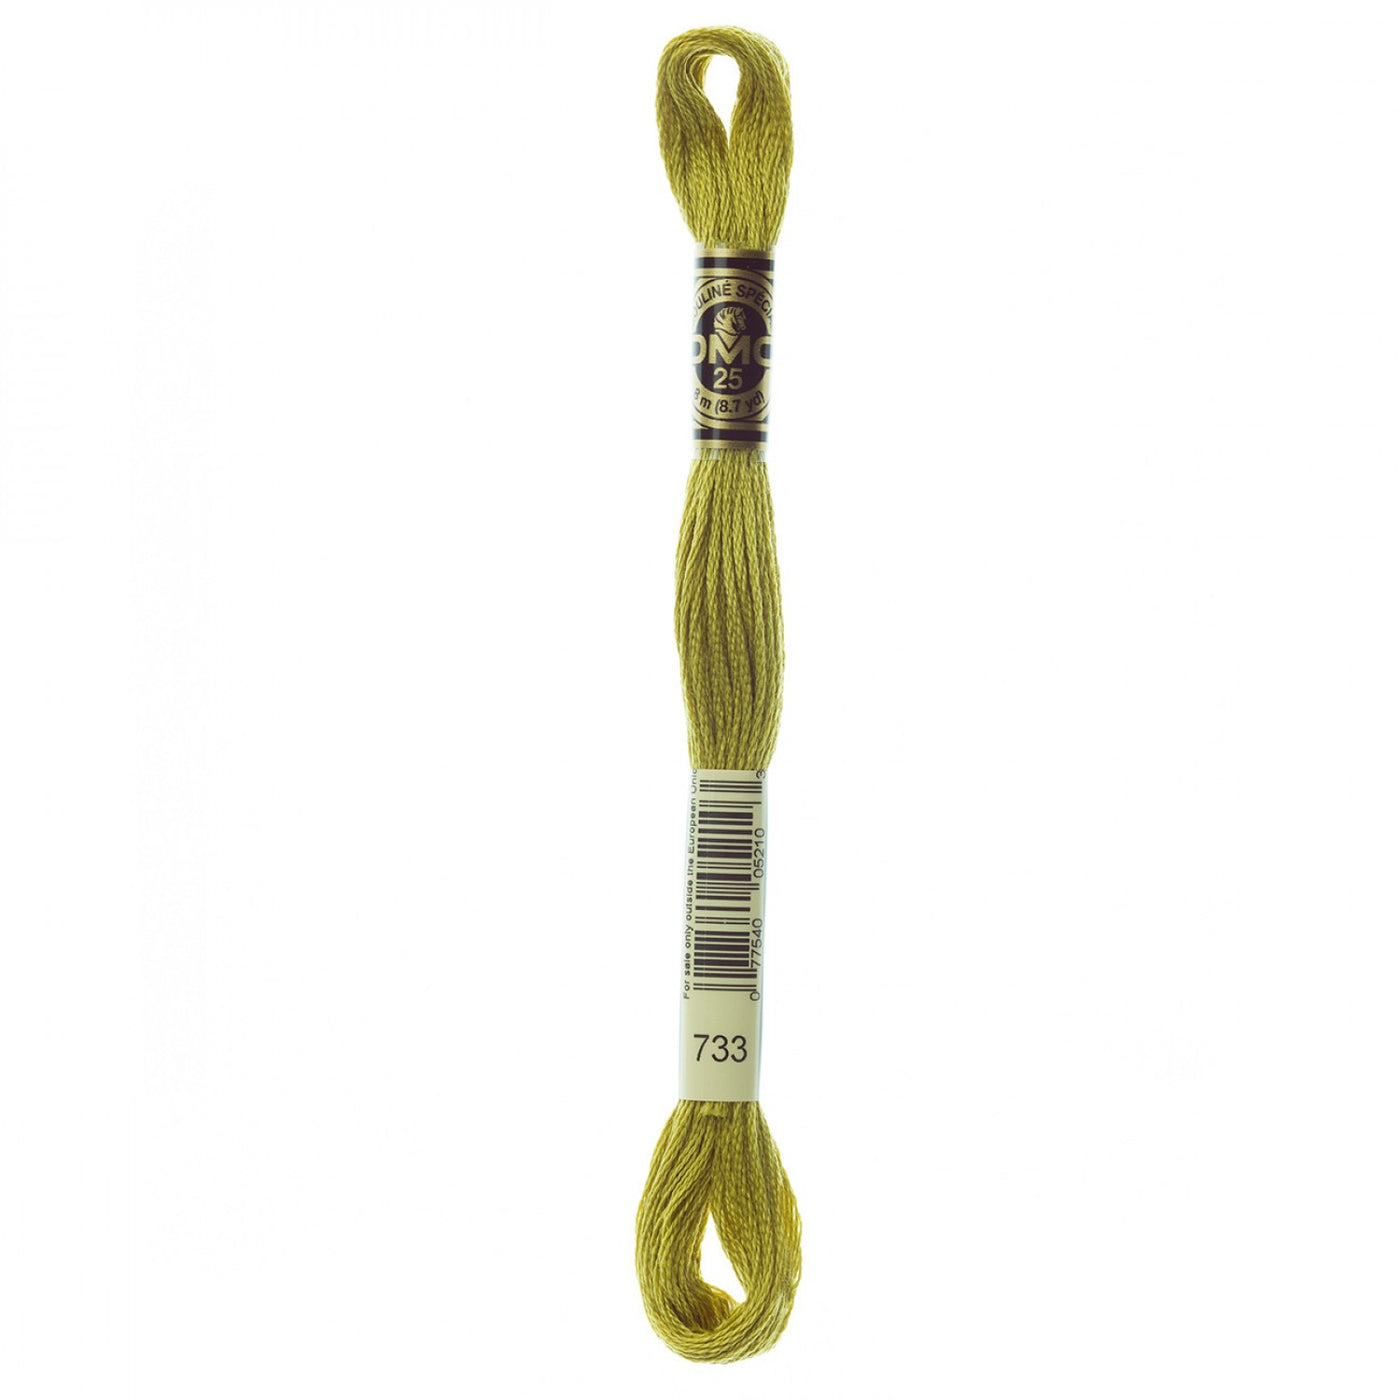 6-Strand Embroidery Floss 733 Medium Olive Green